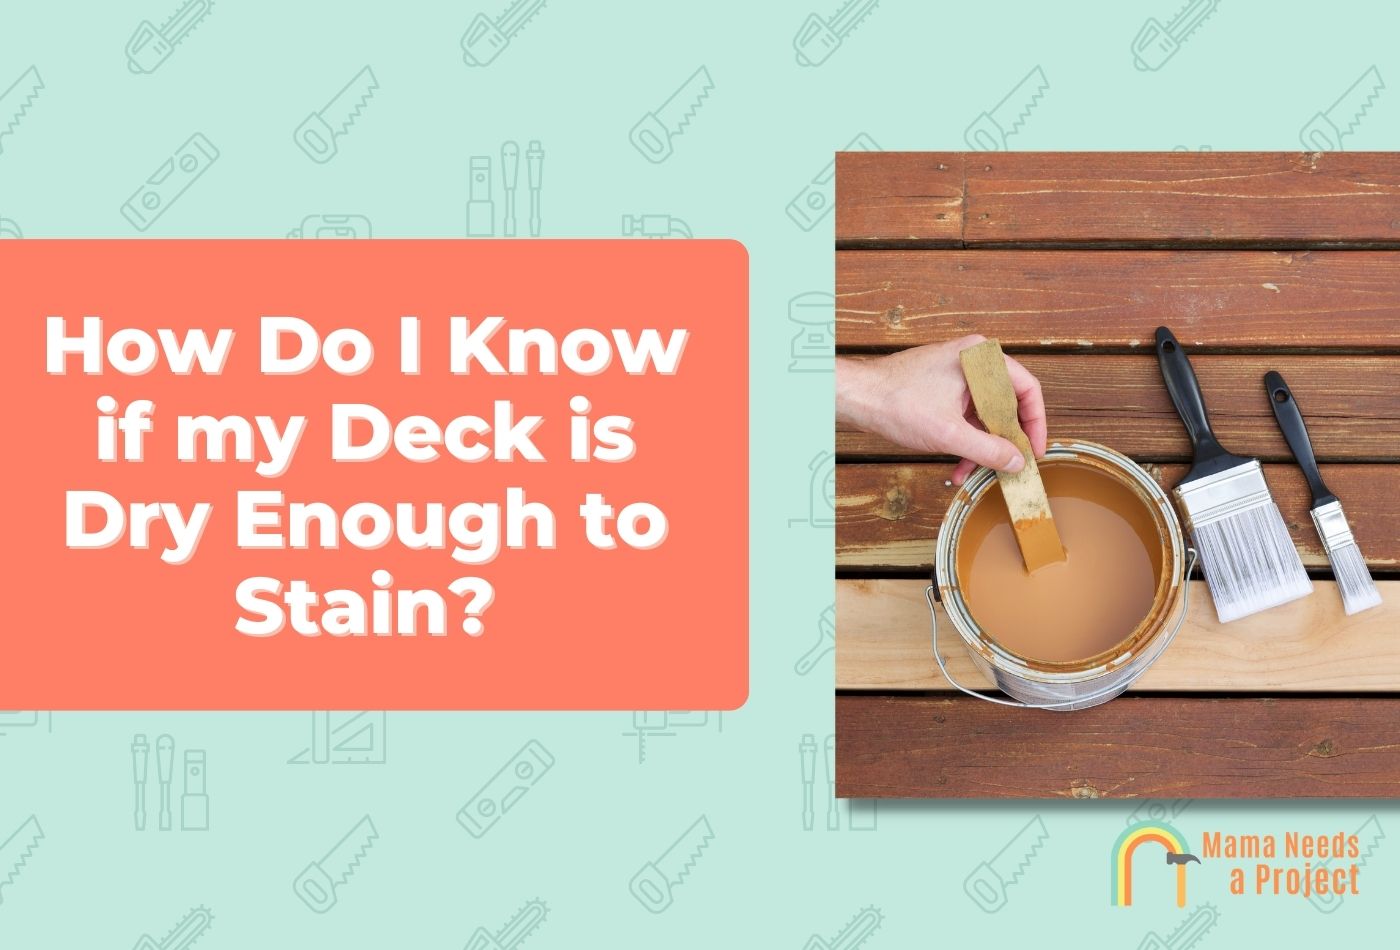 How Do I Know if my Deck is Dry Enough to Stain?